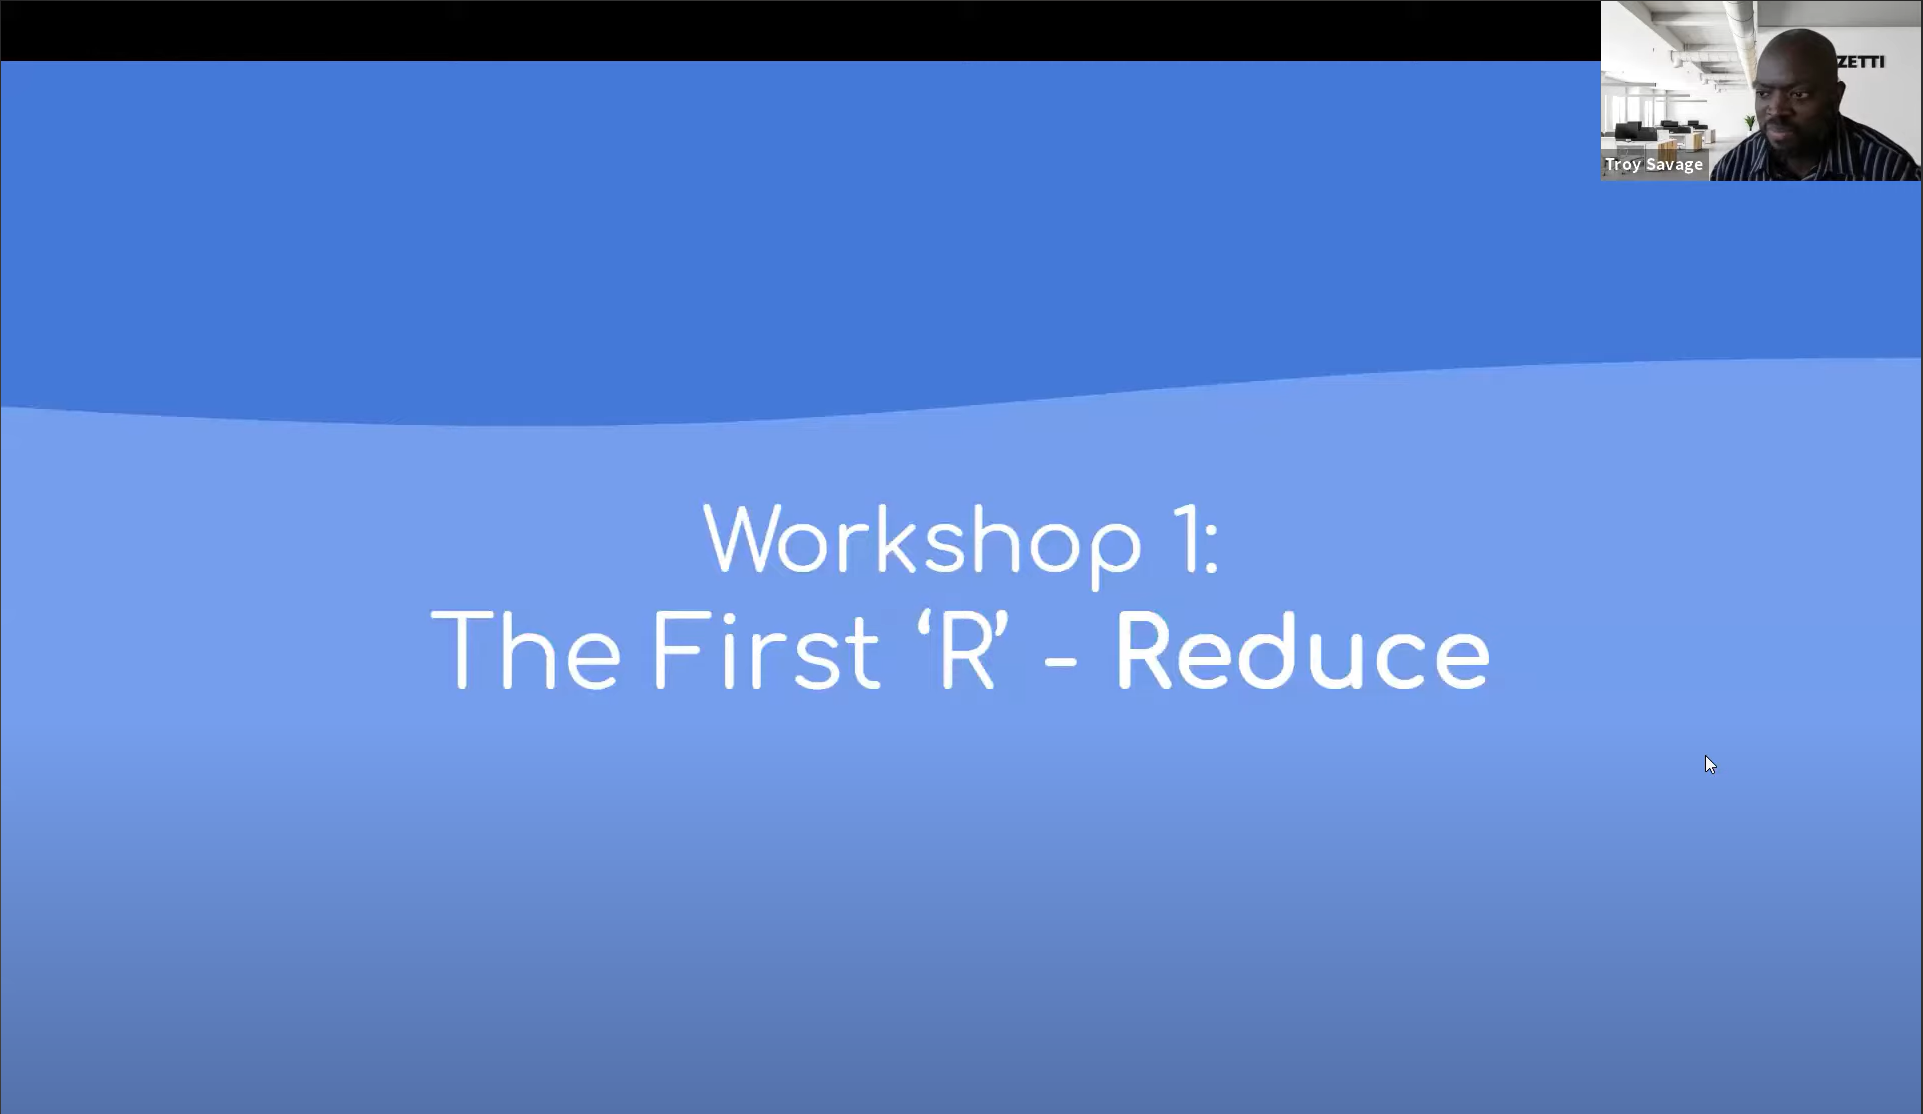 1. The First R: Reduce